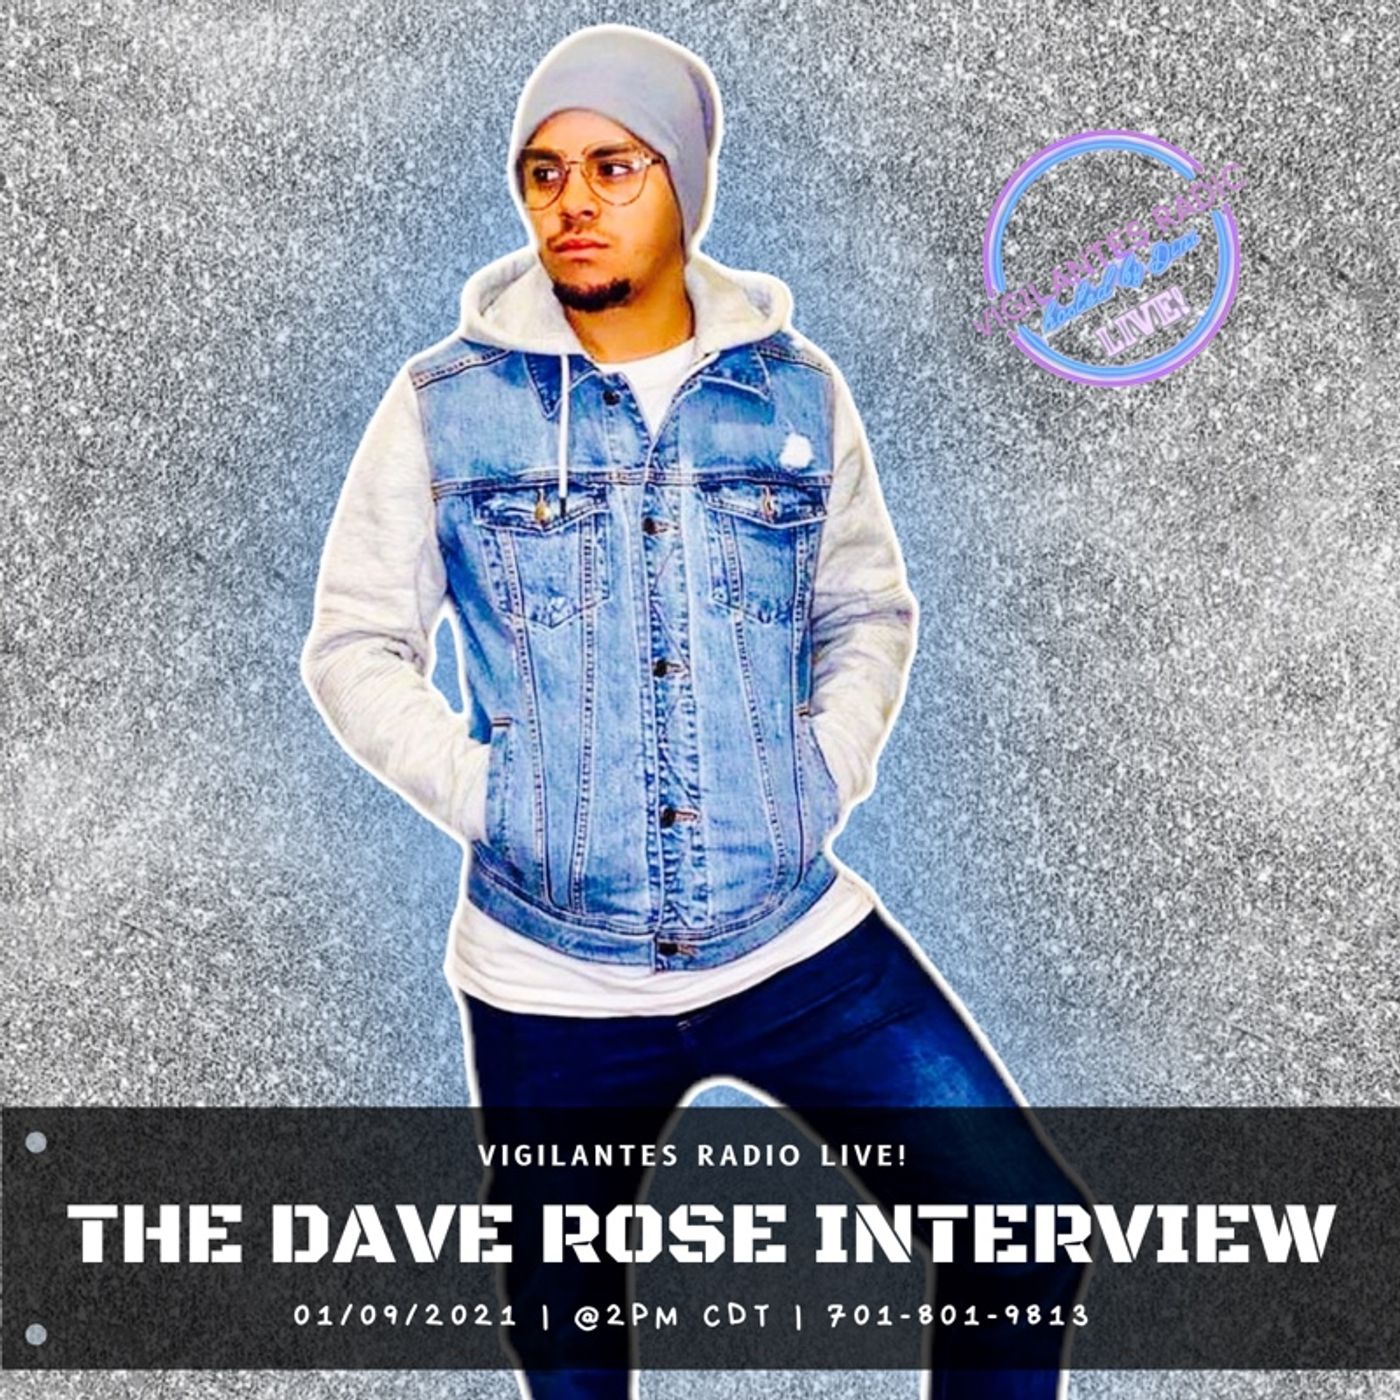 The Dave Rose Interview. Image